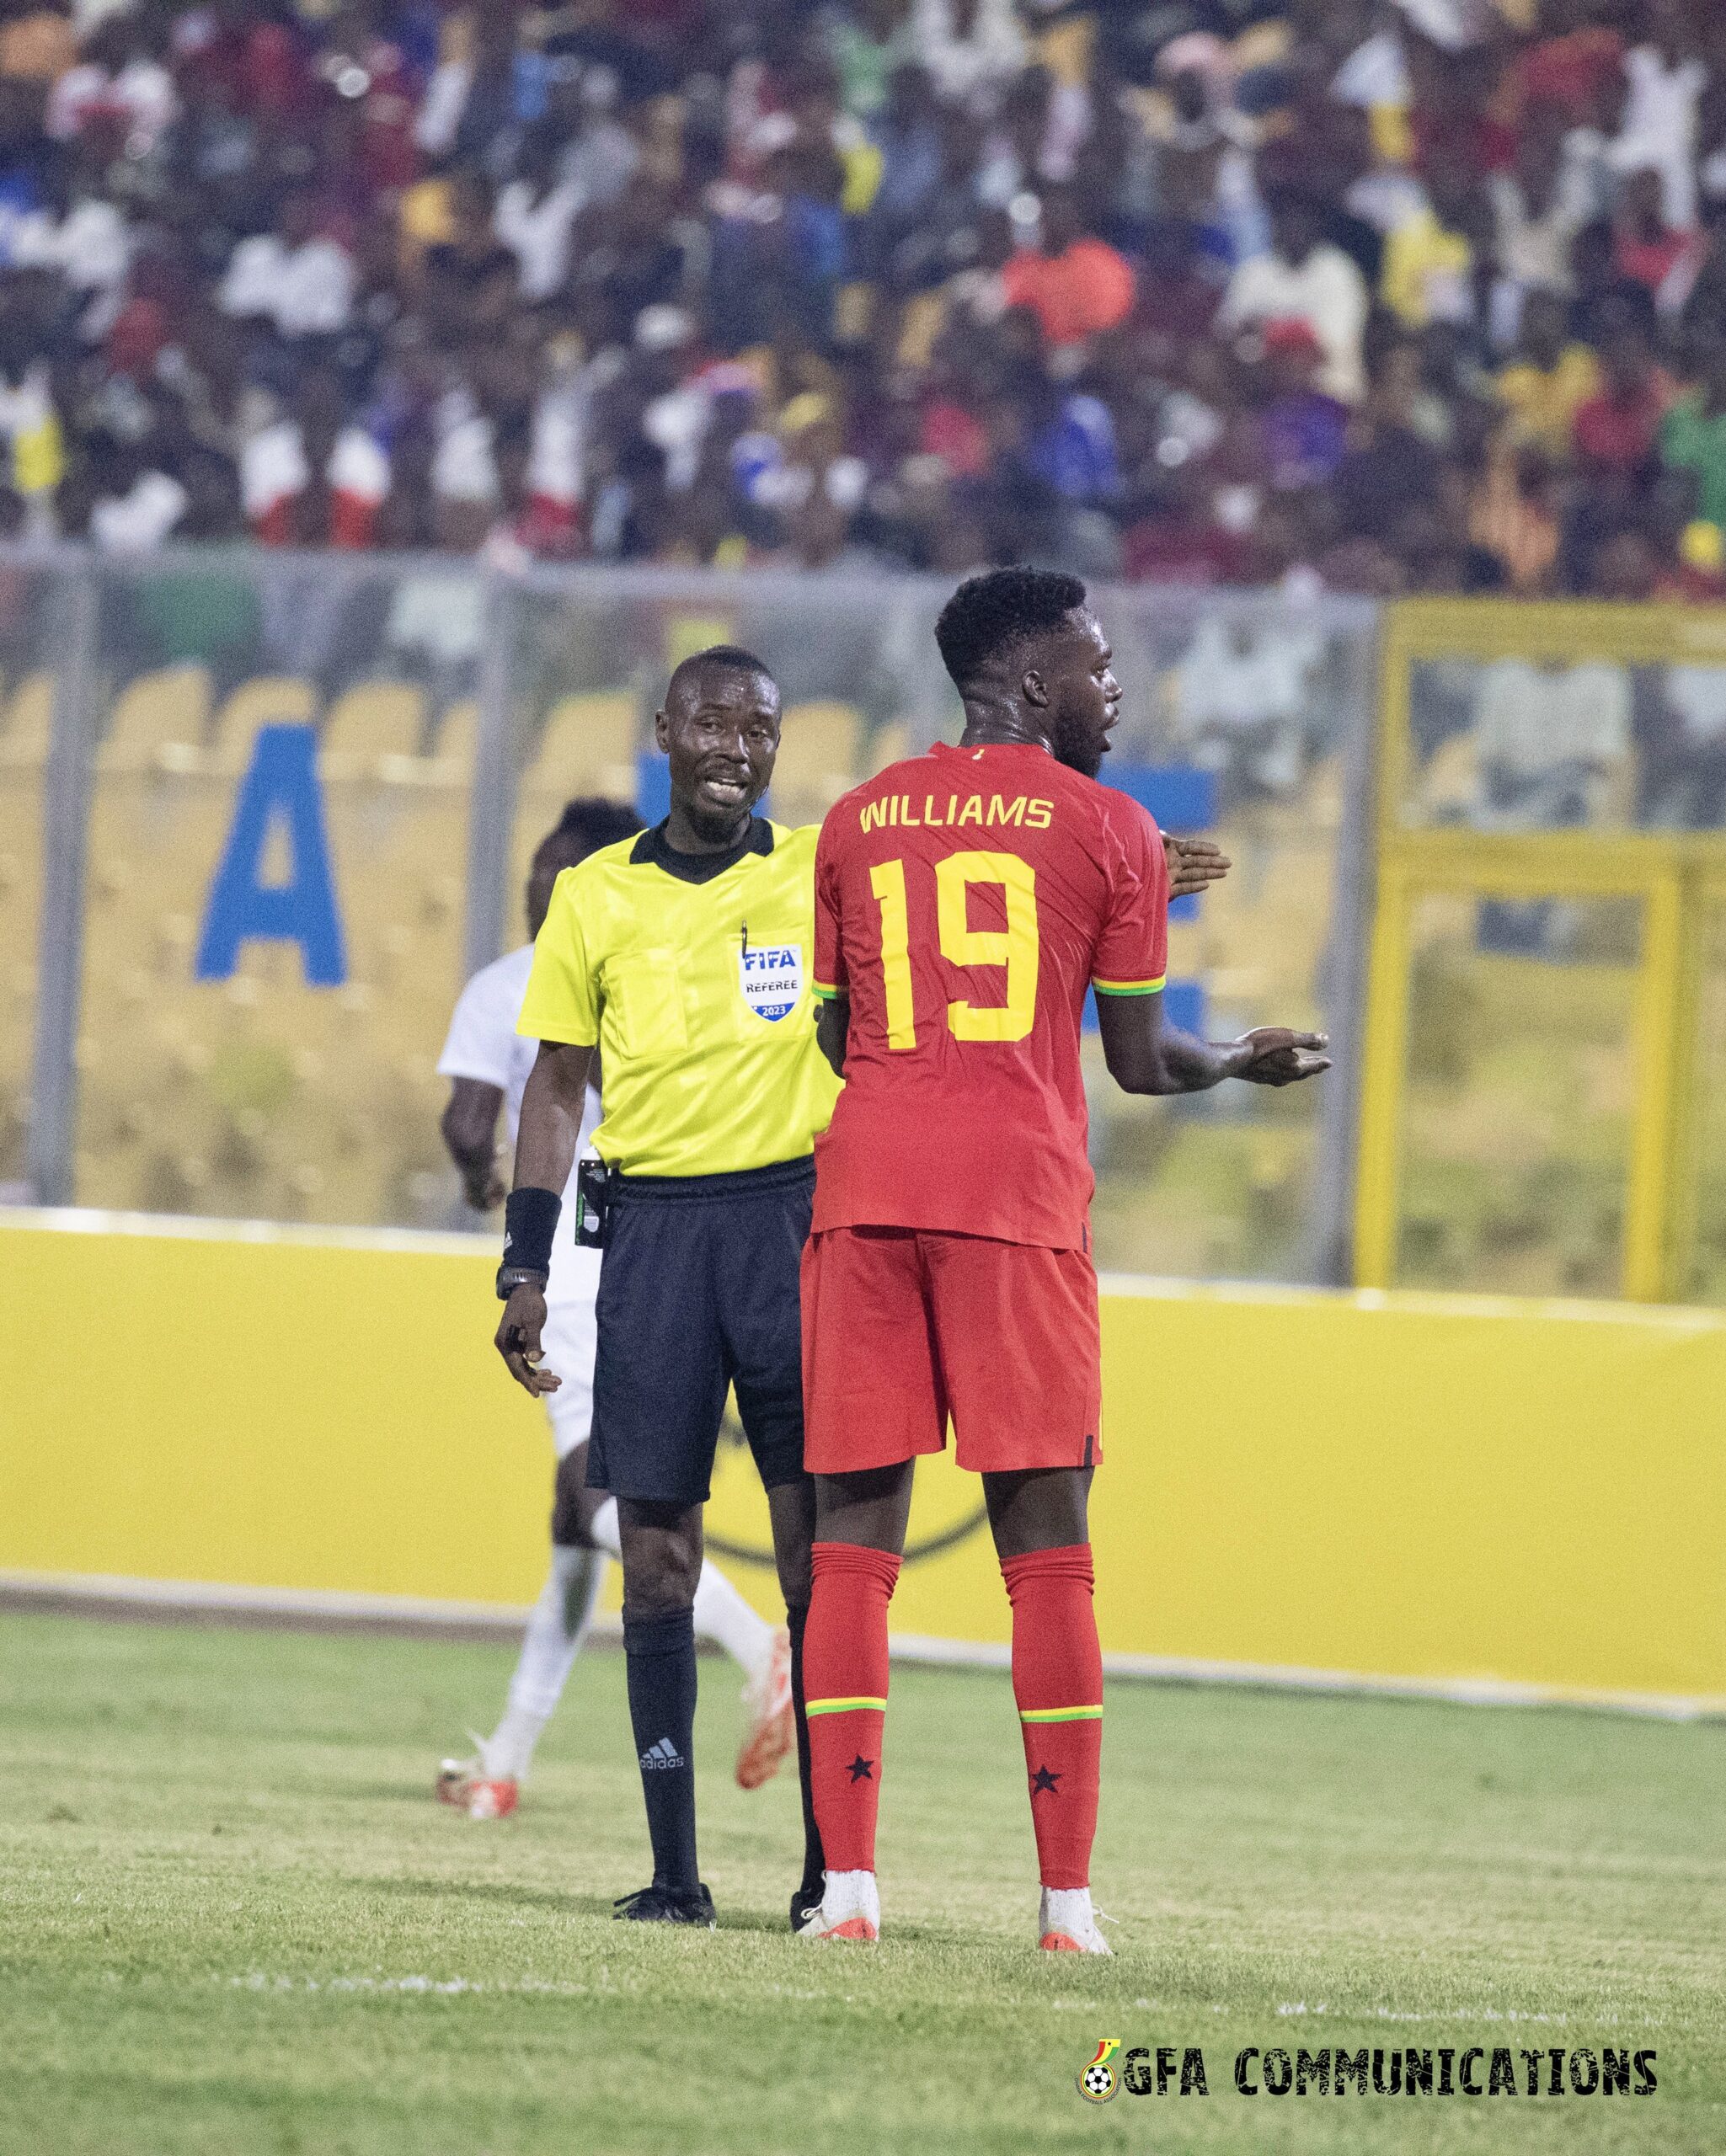 Ghana disappoints in a 0-0 draw against Namibia